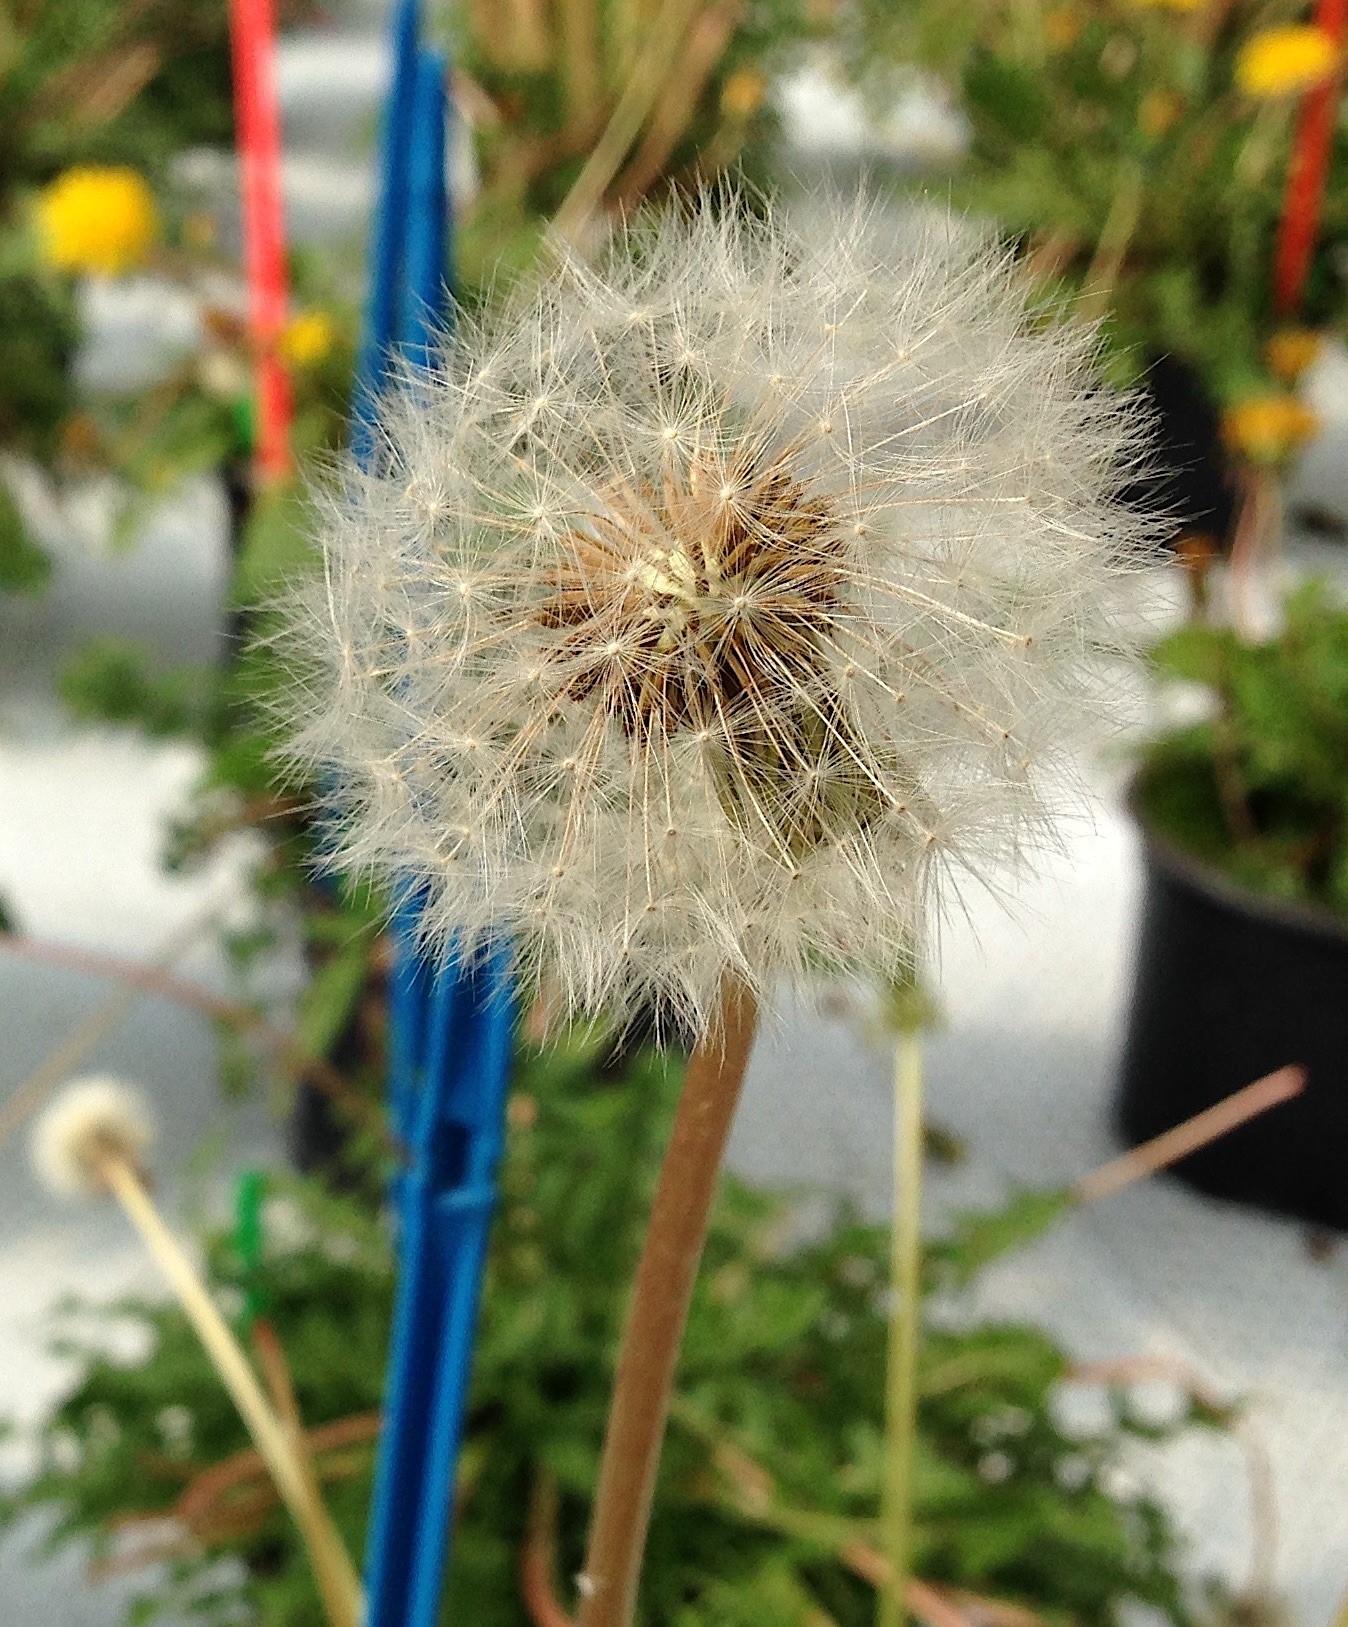 Crucial gene discovered in dandelion